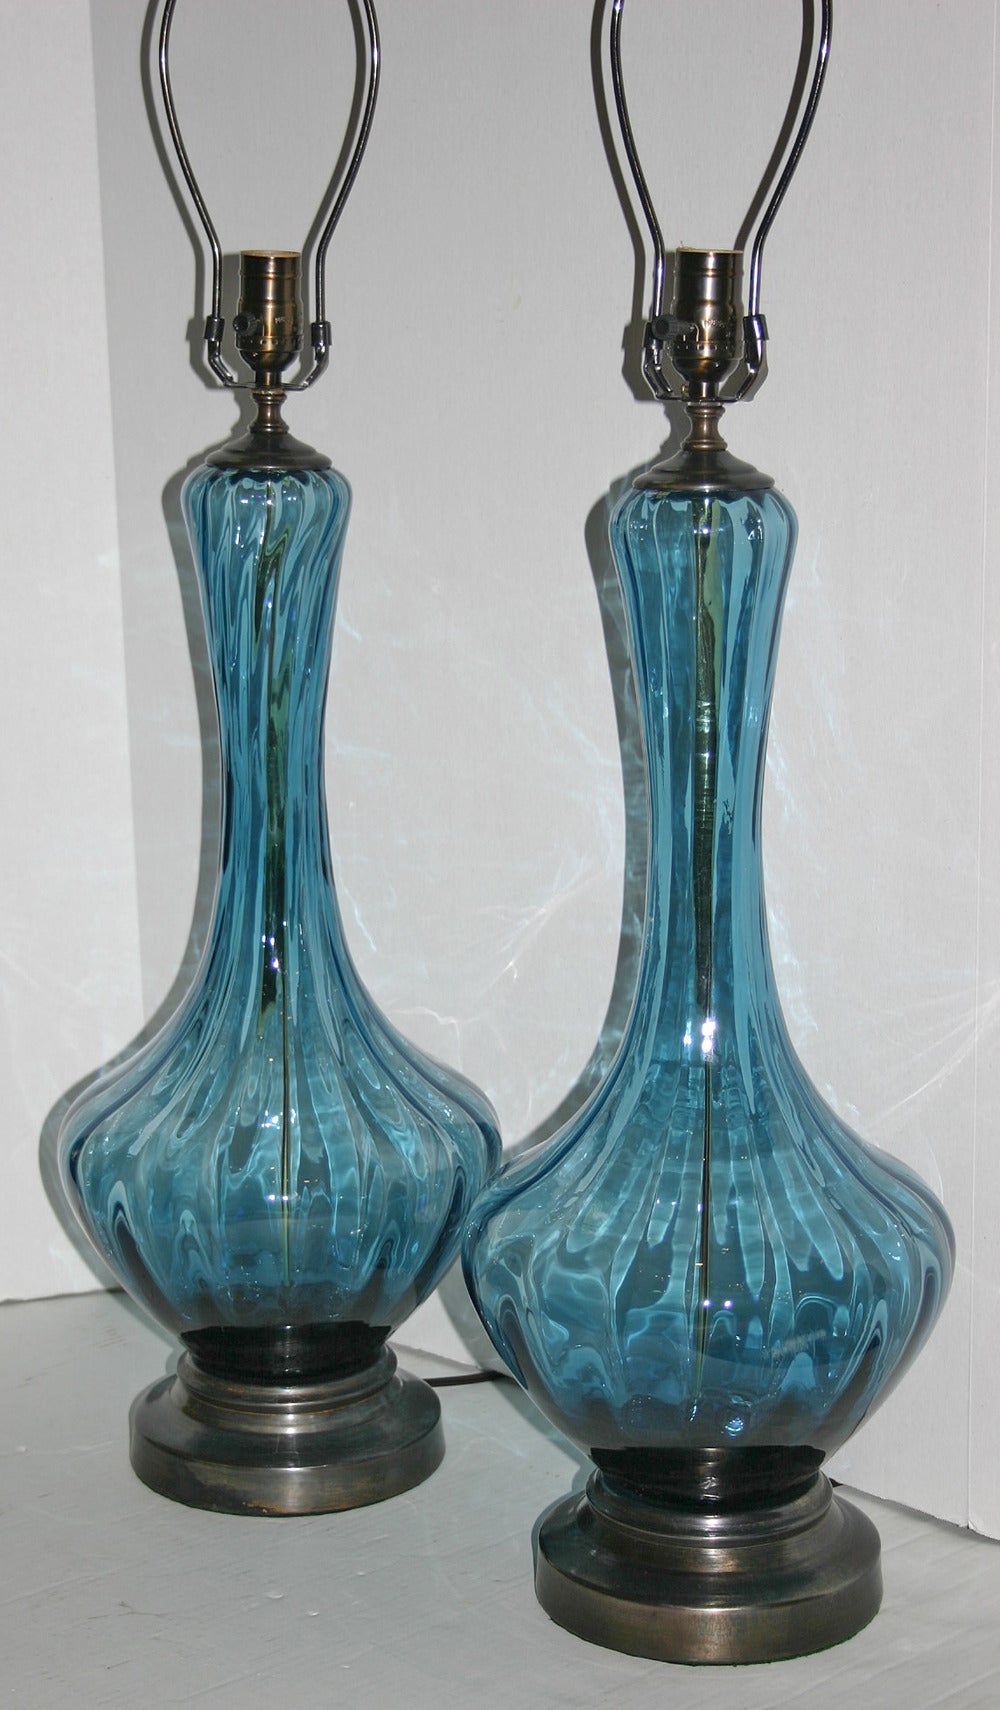 Pair of 1940s Venetian glass blue table lamps with patinated metal bases.